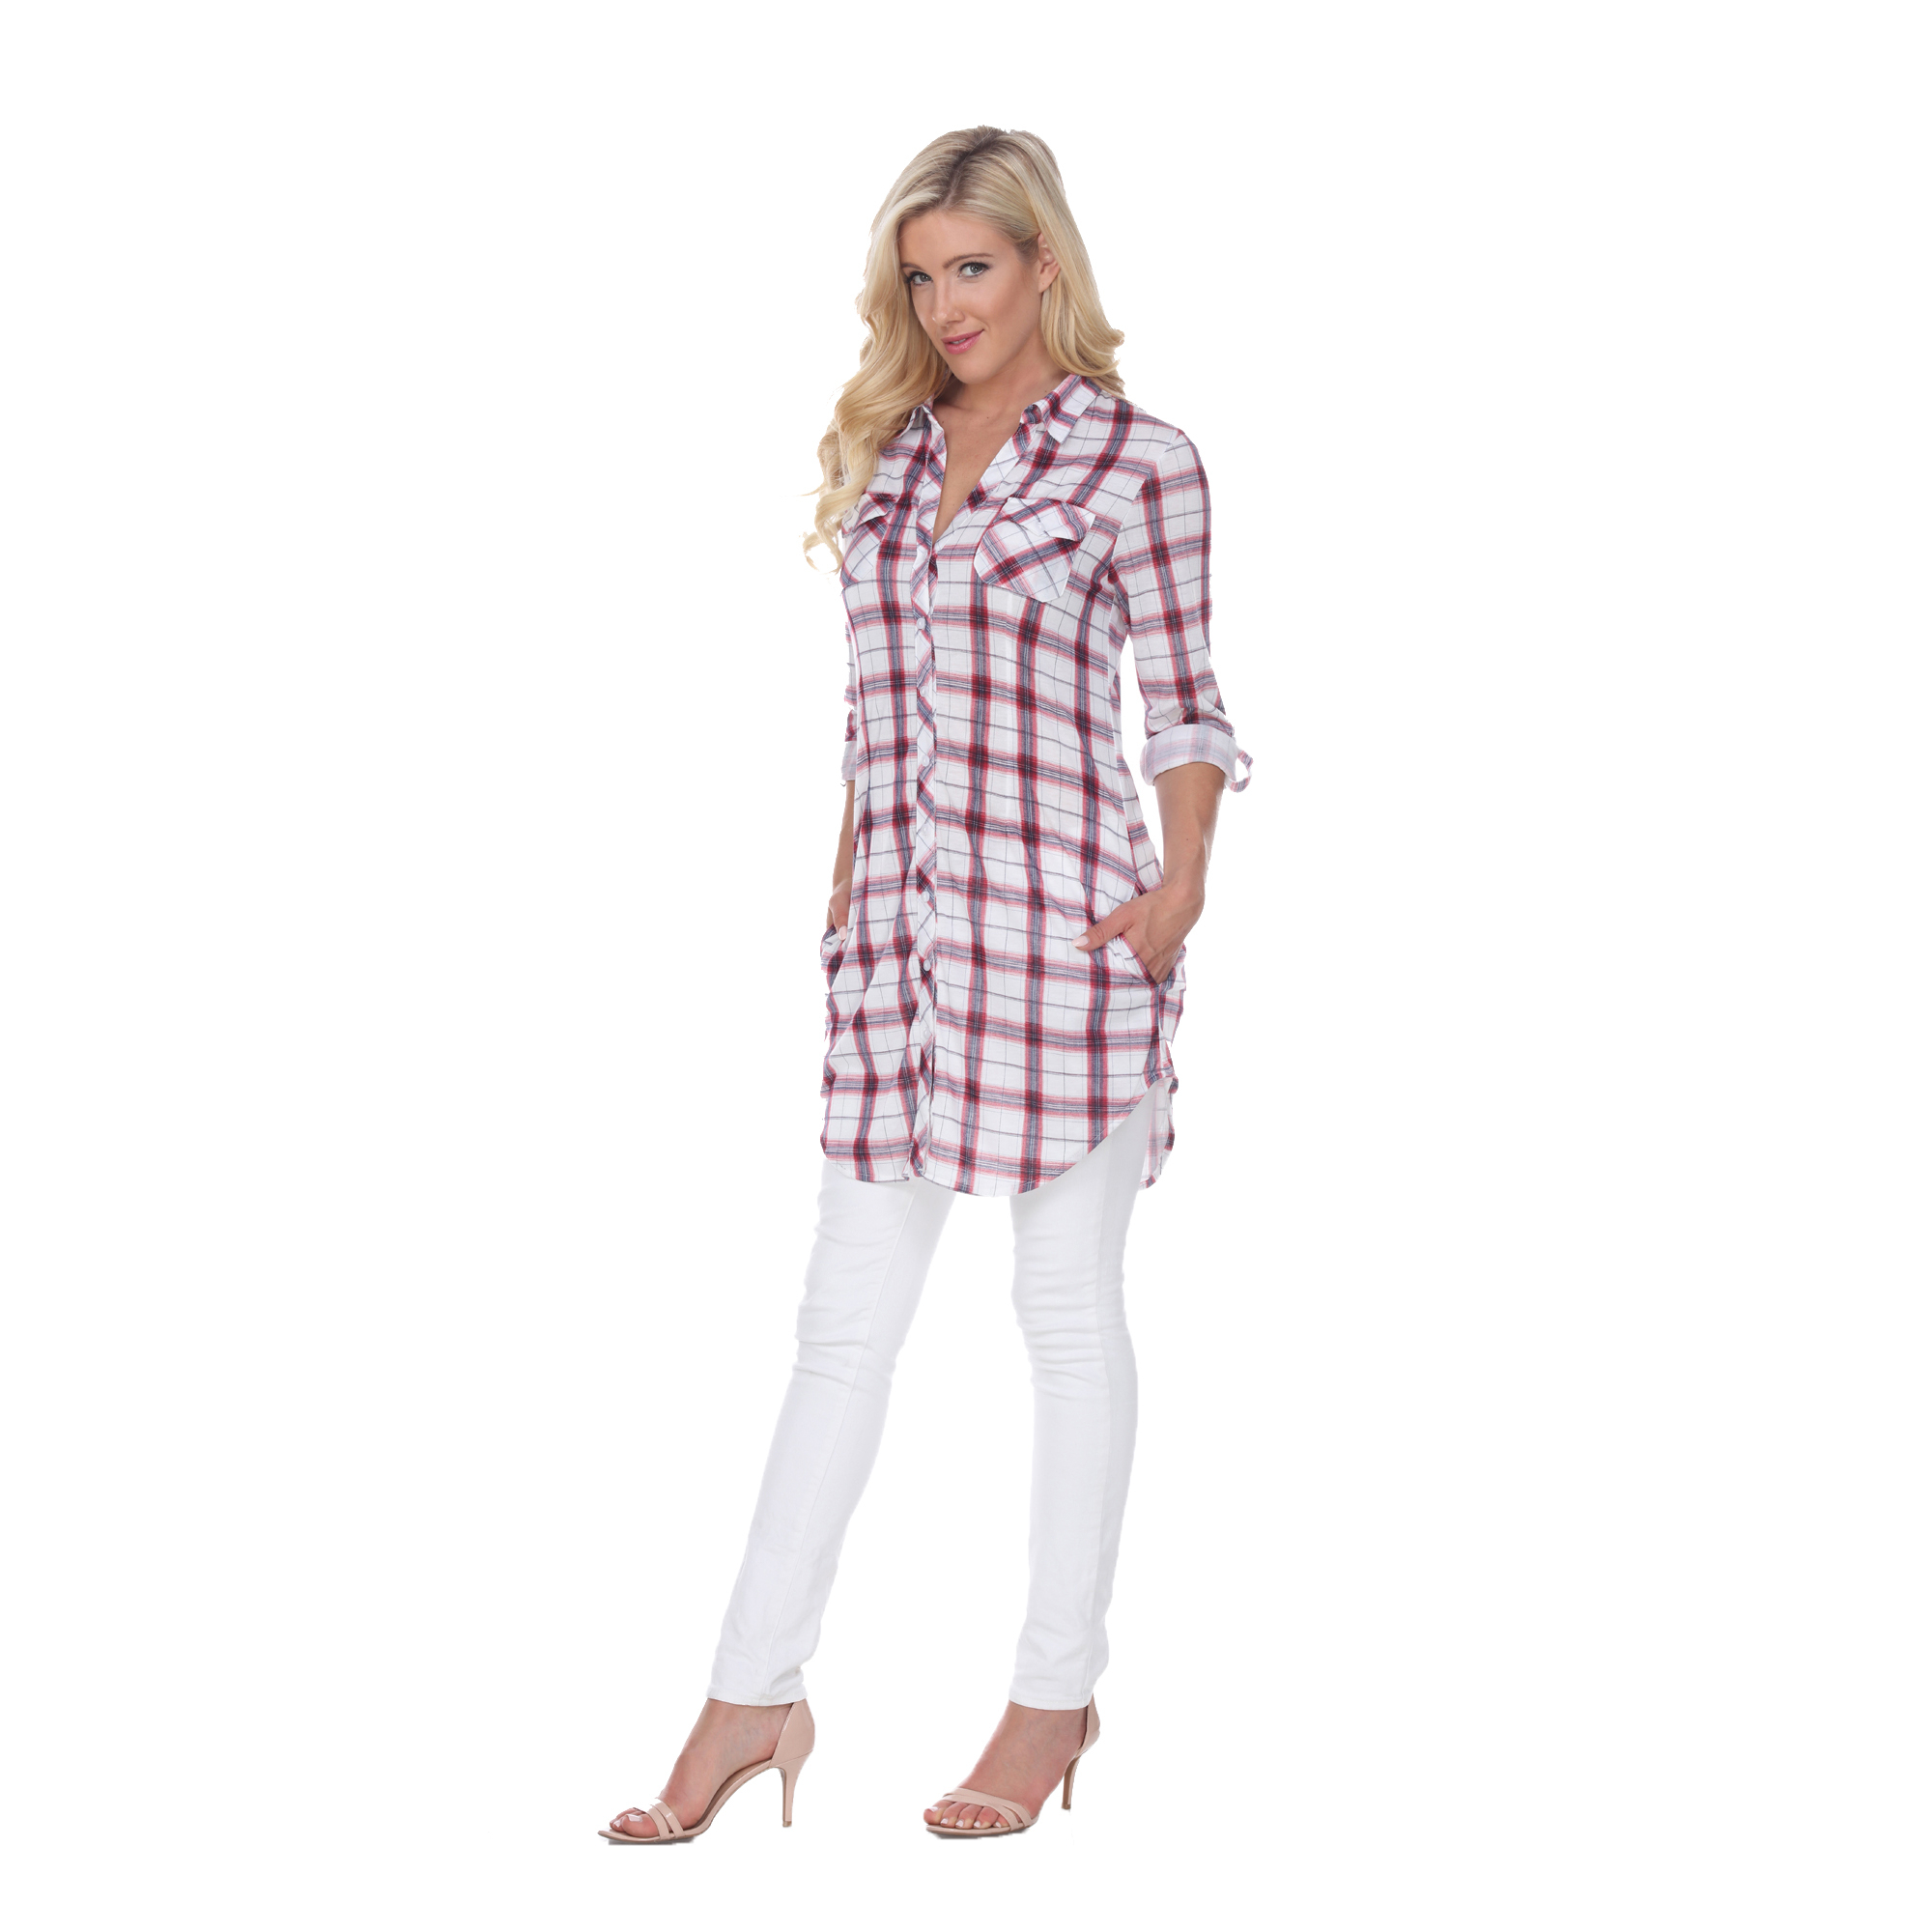 White Mark Women's Stretchy Plaid Flannel Tunic Top - Red/White, Medium